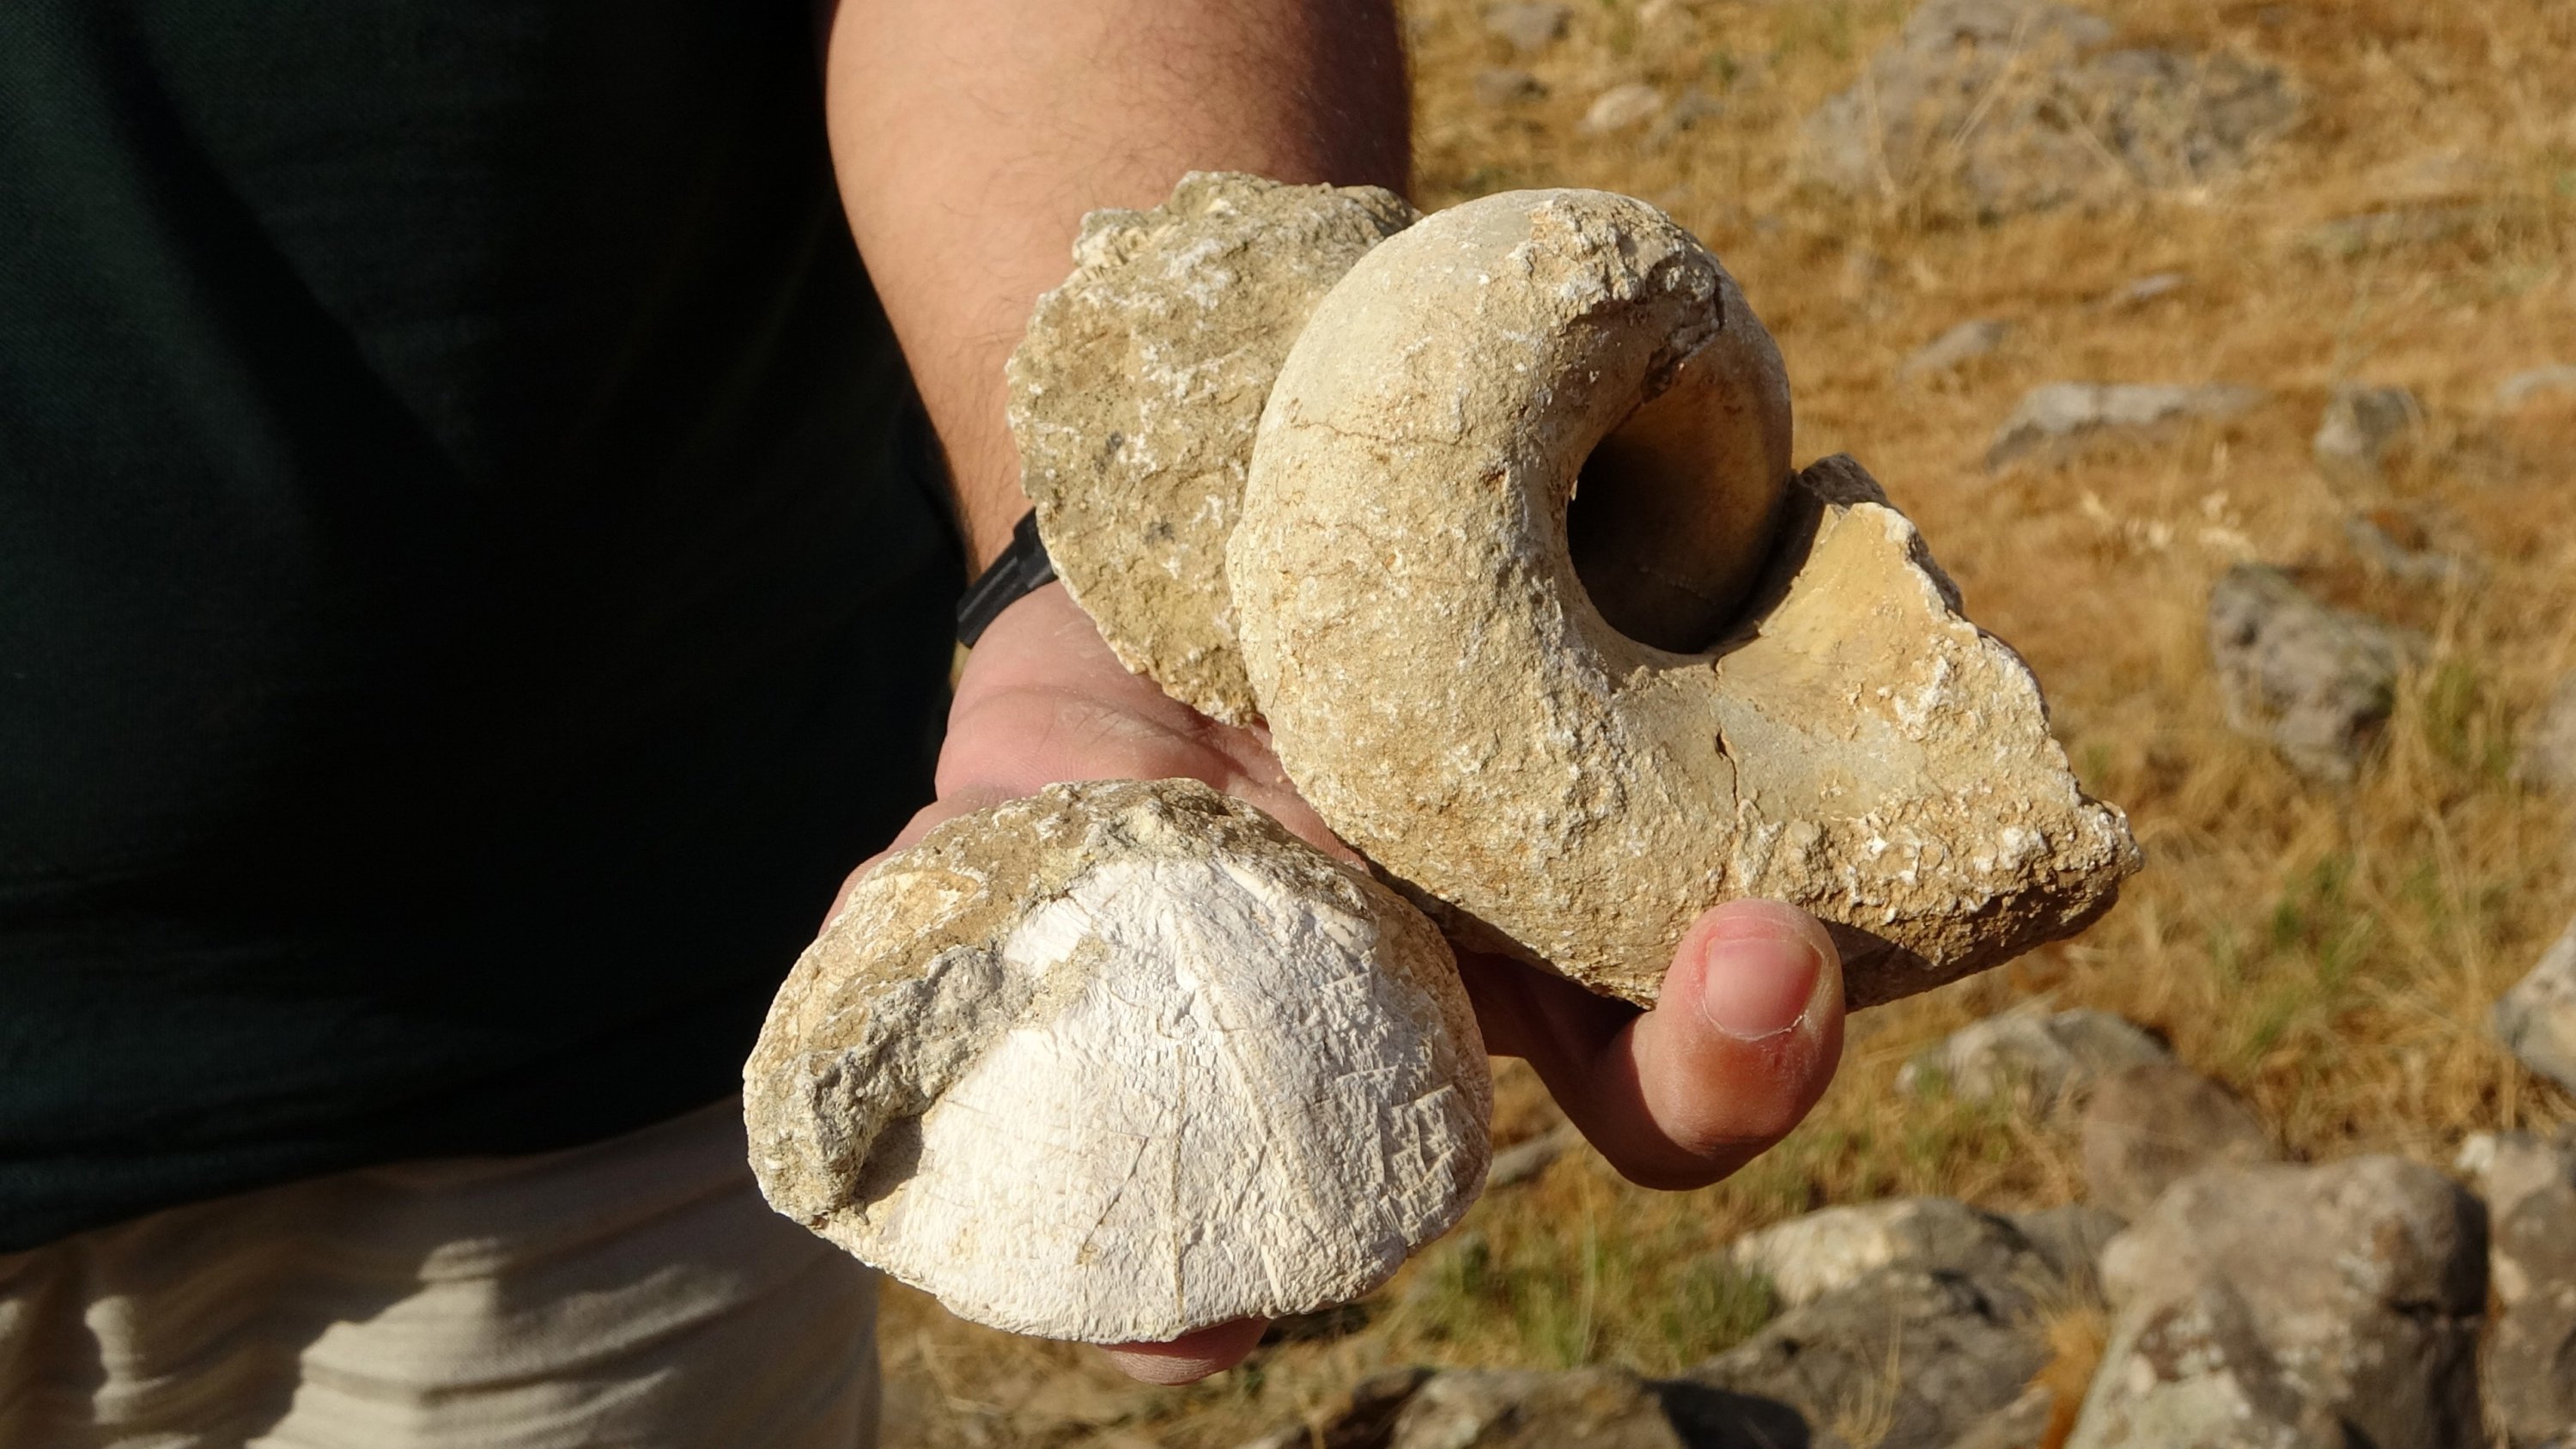 Fossils unearthed in Muş, eastern Turkey, on Aug. 14, 2021. (IHA Photo)